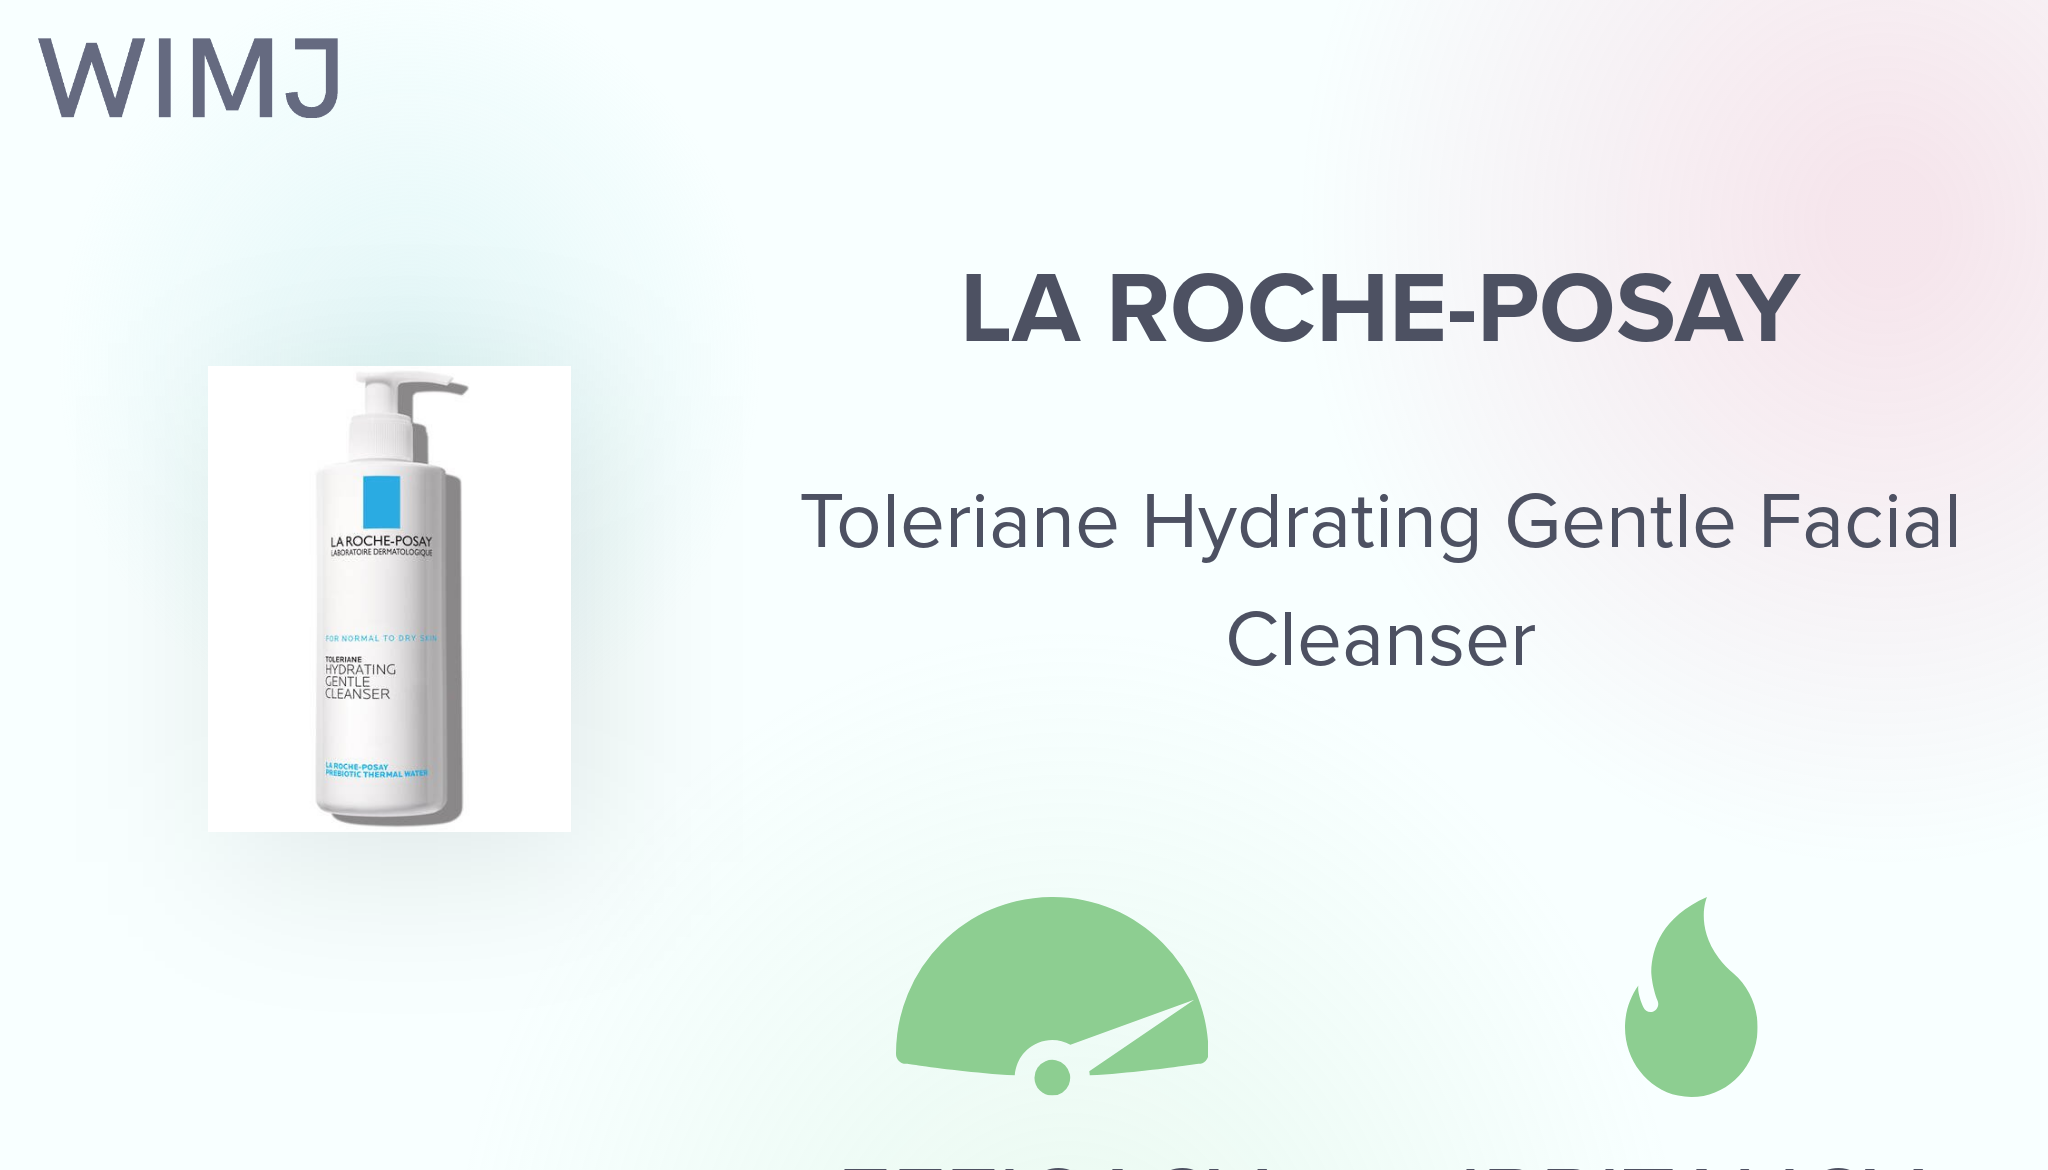 Review: La Roche-Posay - Toleriane Hydrating Gentle Facial Cleanser - WIMJ